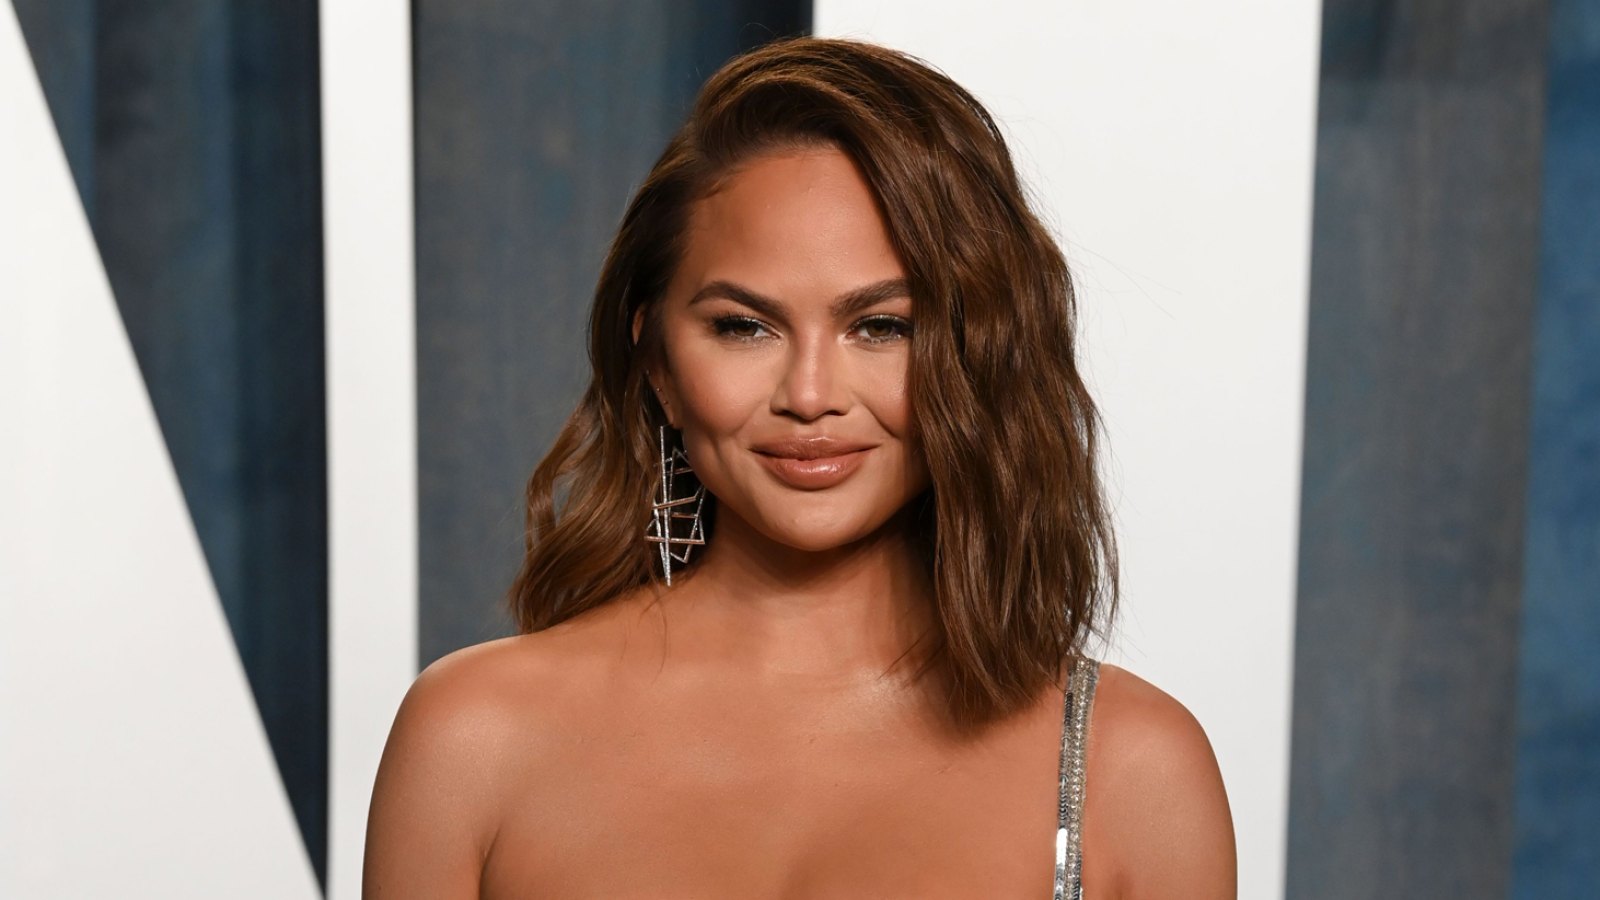 Pregnant Chrissy Teigen Wows in a Skintight Floral Dress